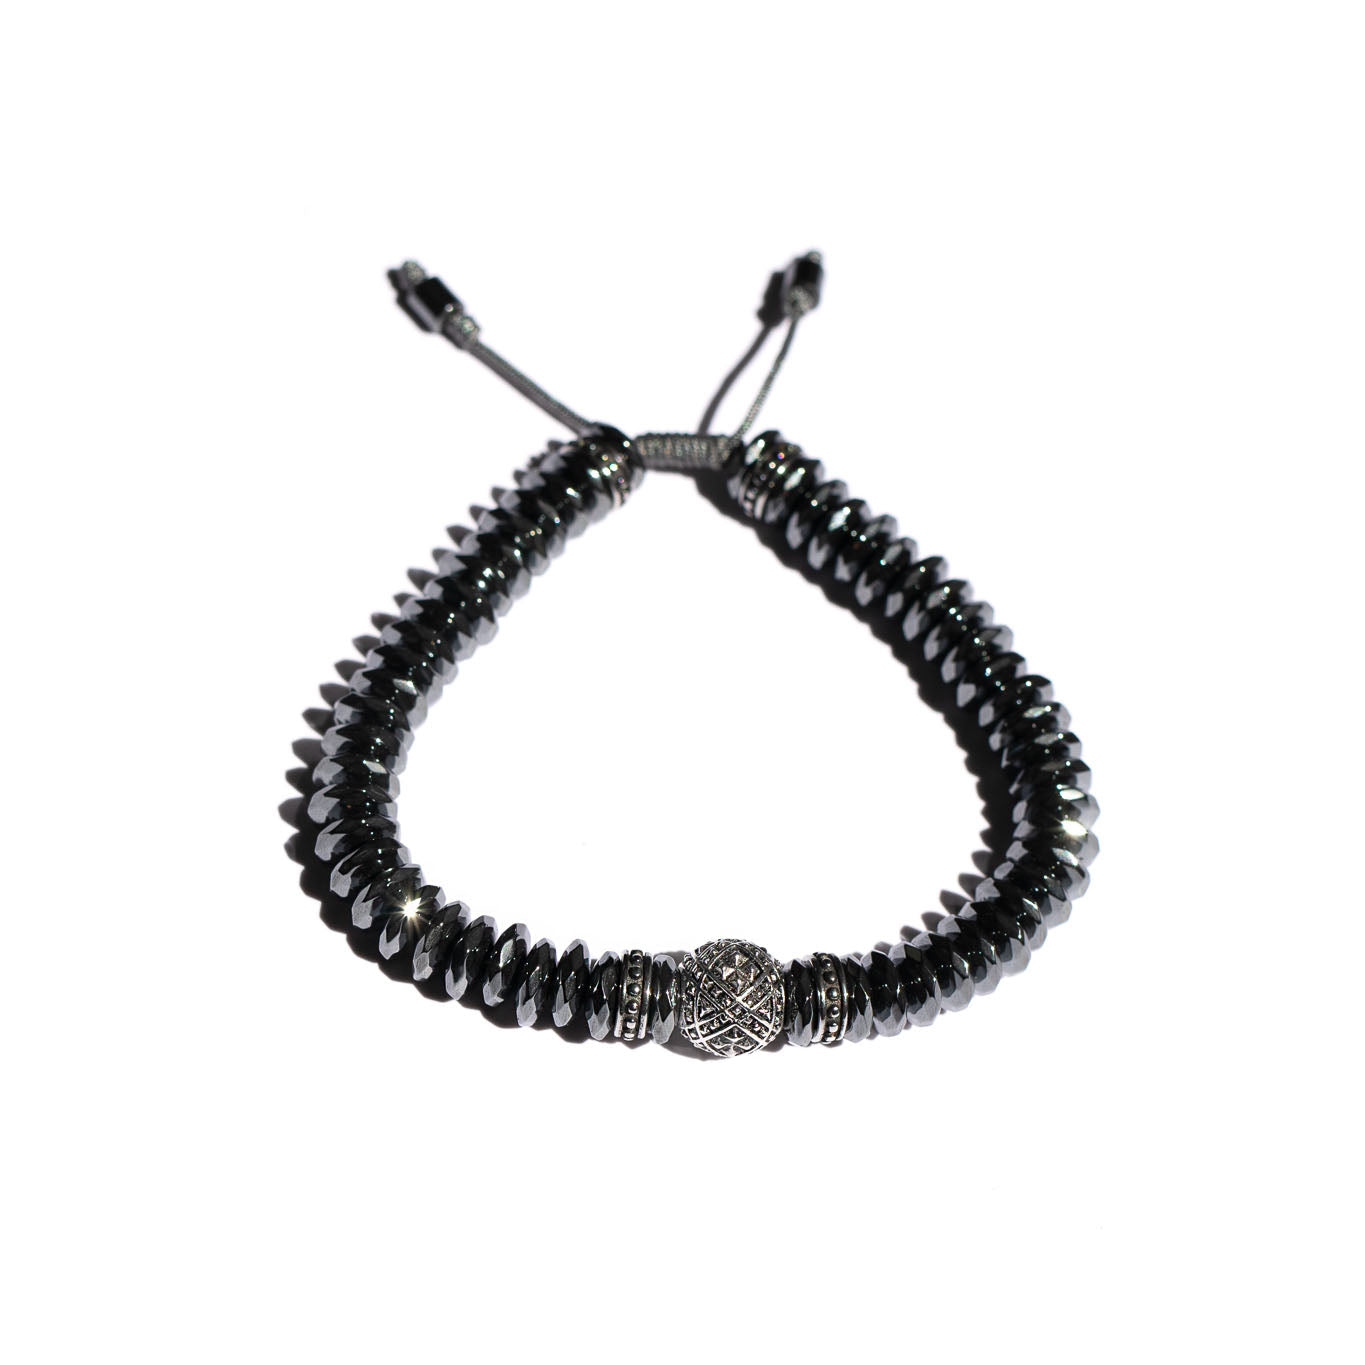 Beaded Bracelet with Silver Sacred Geometry Pattern Focal & Precision-Cut Hematite